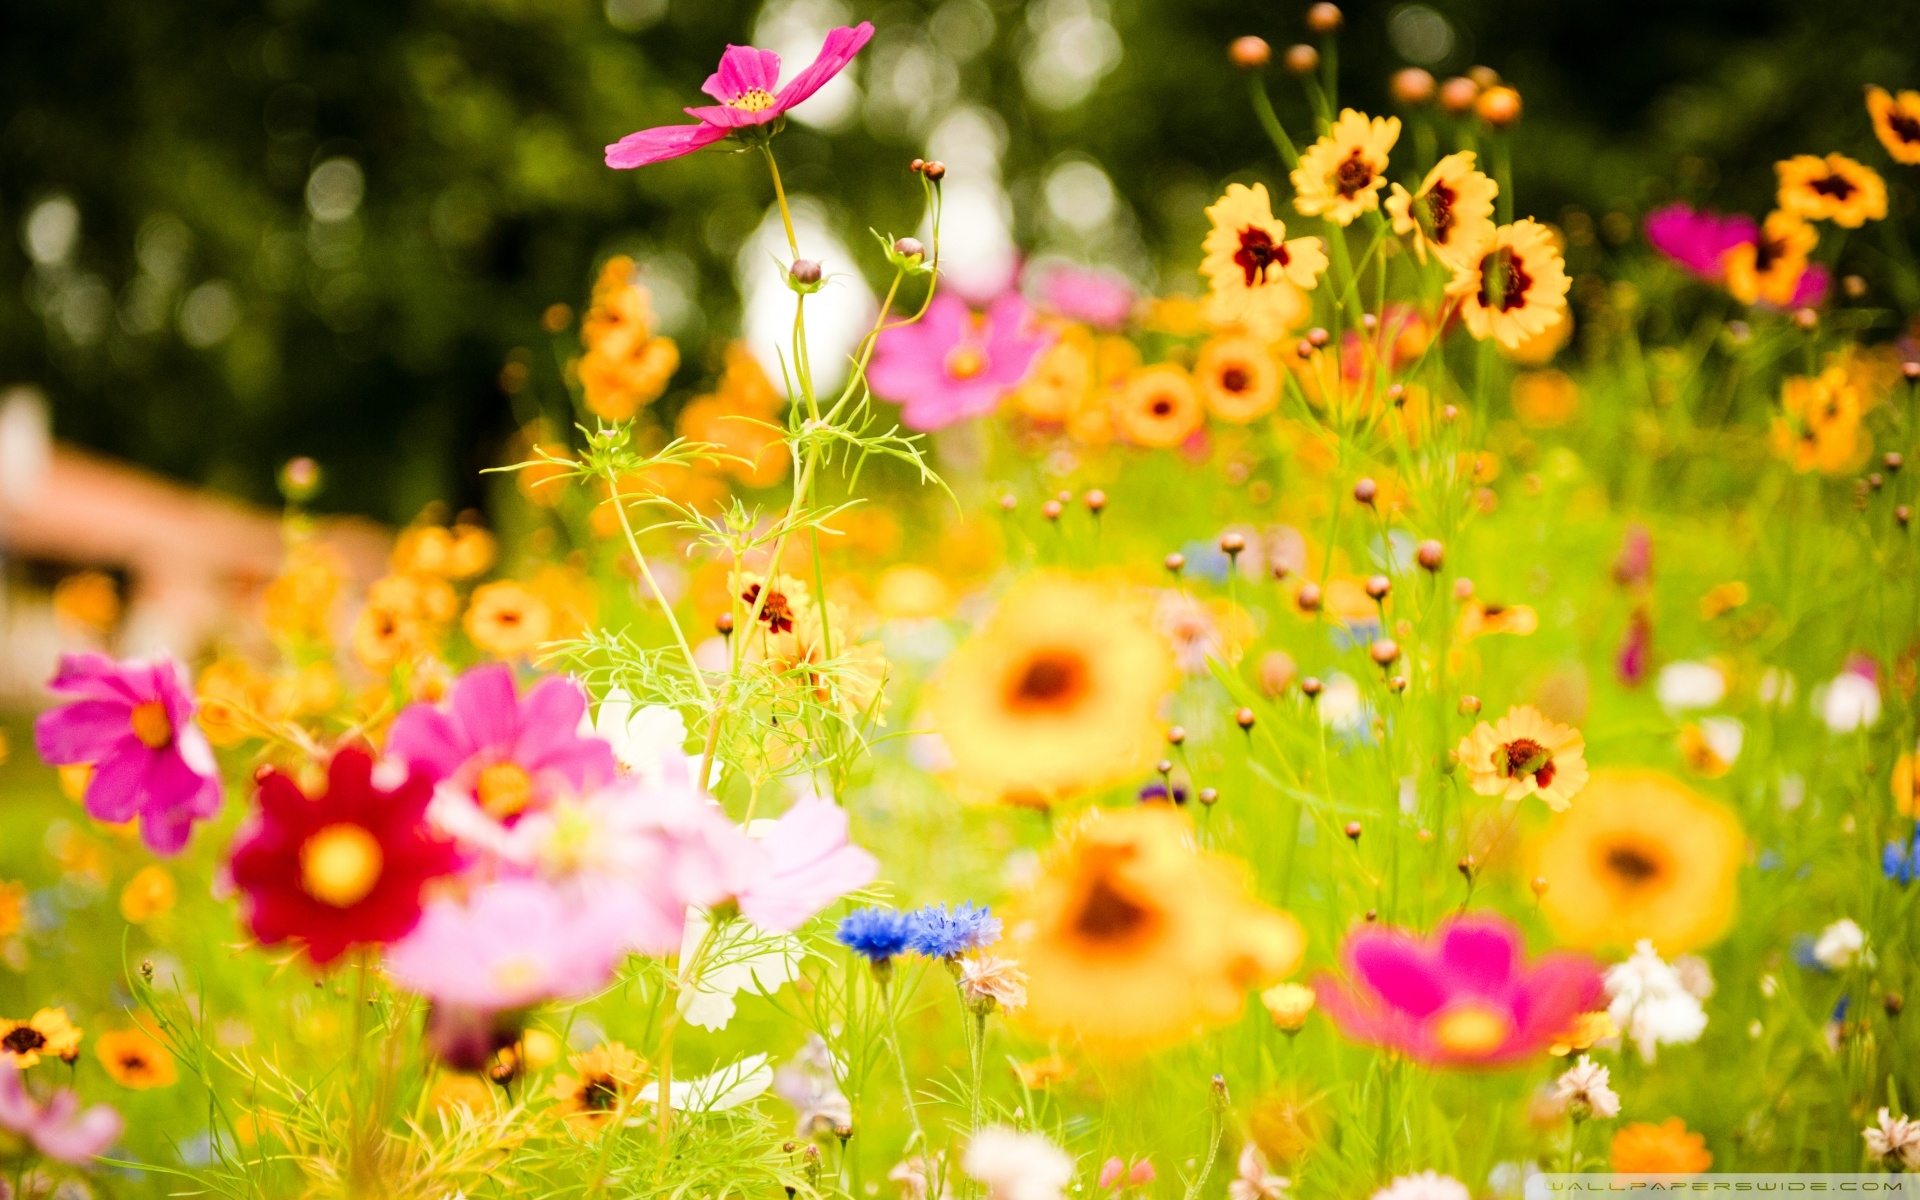 Cool Flowers Background Wallpaper 1920x1200 83290